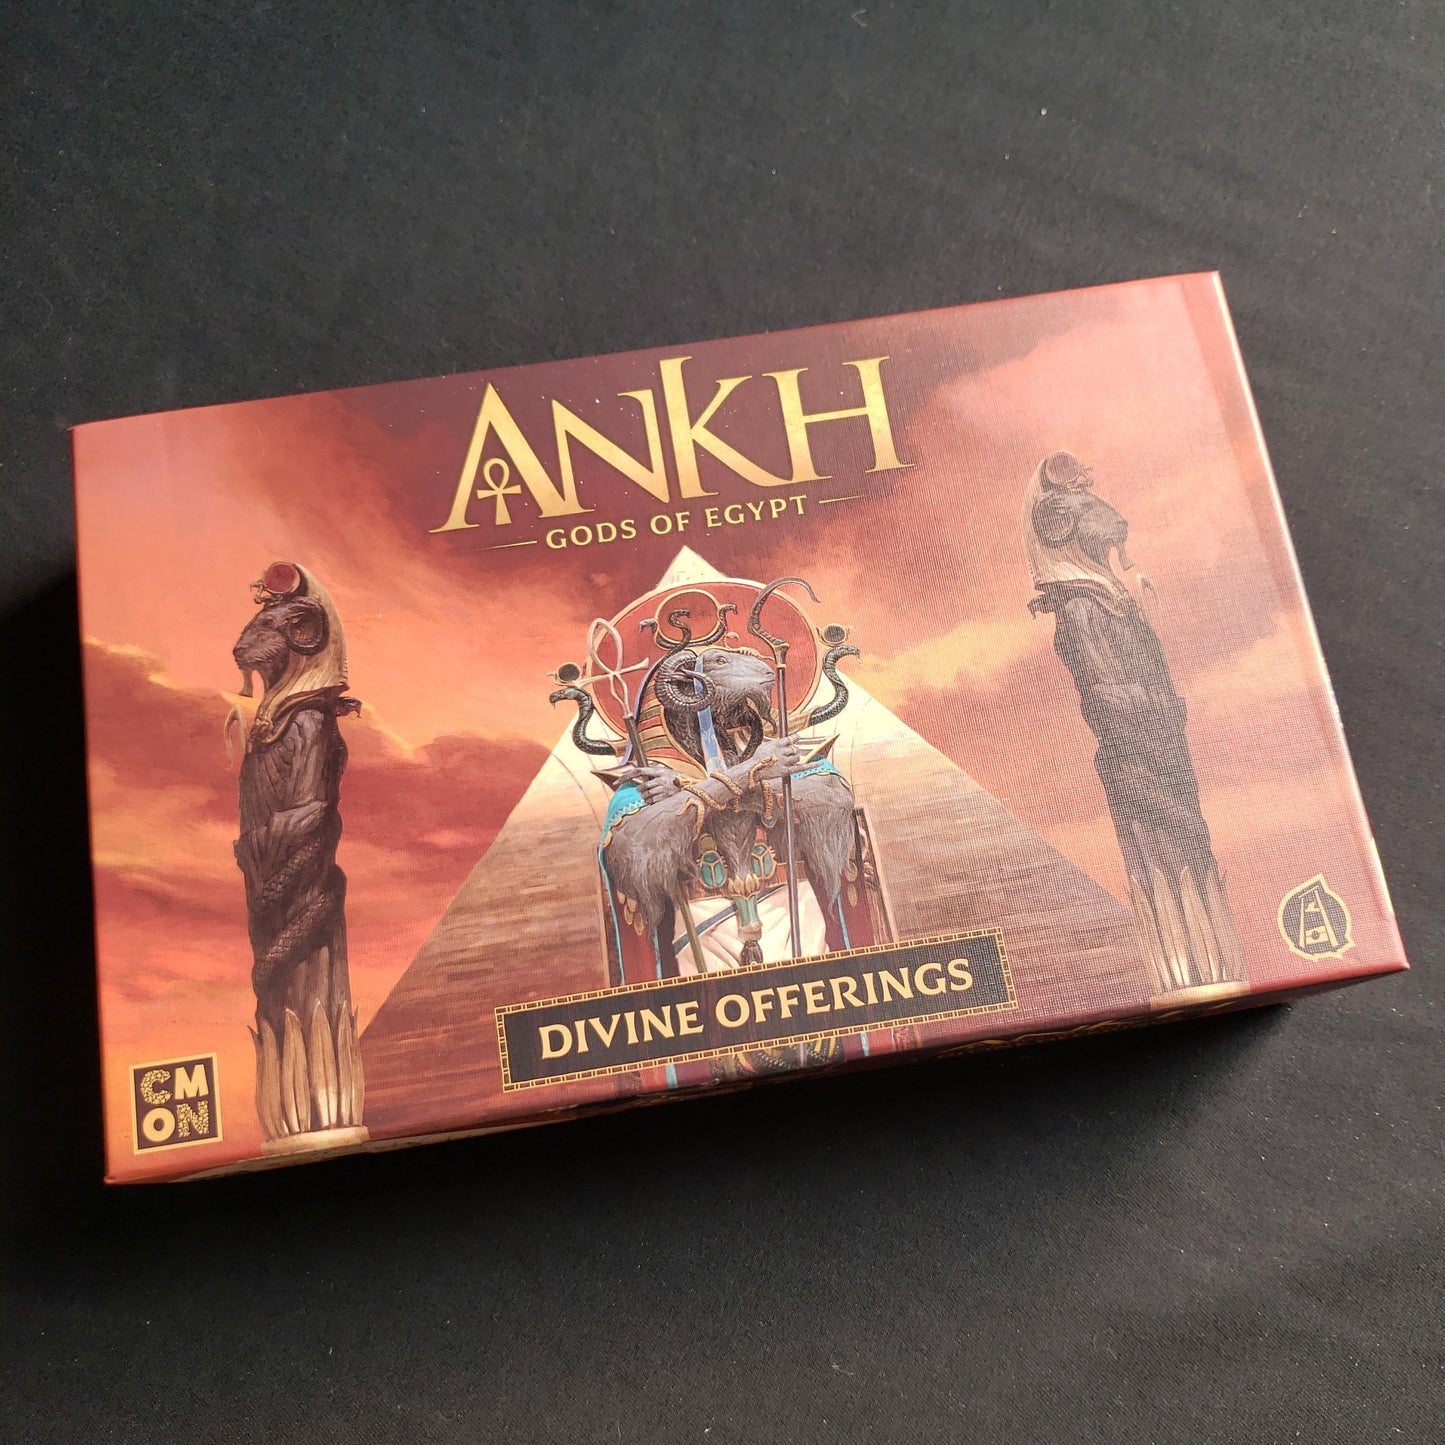 Image shows the front cover of the box of the Divine Offerings Kickstarter components box for the Ankh: Gods of Egypt board game